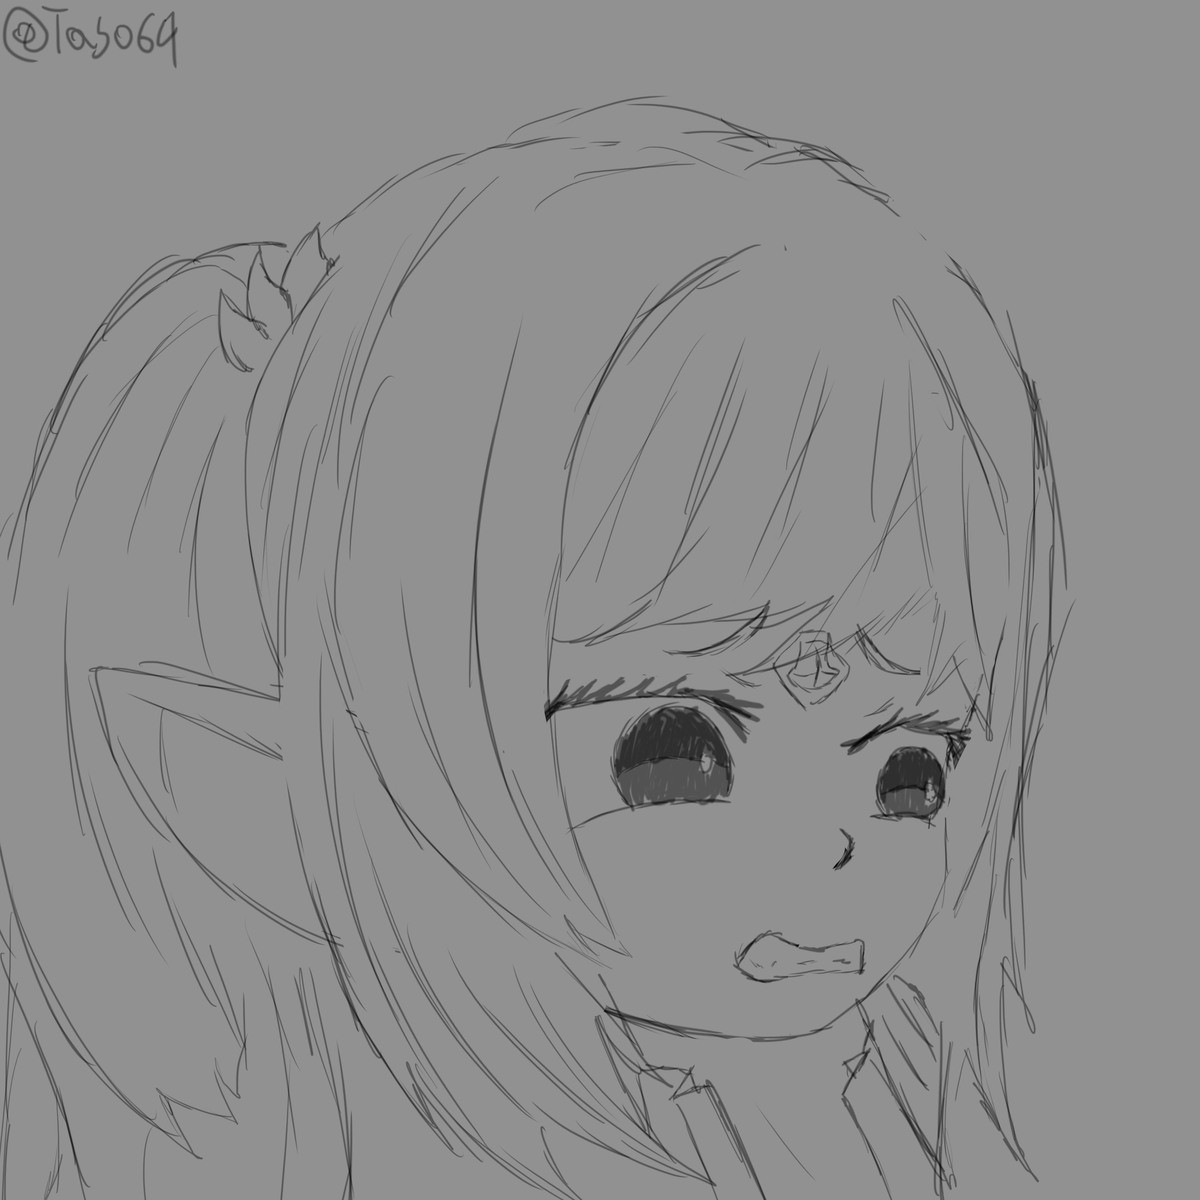 DailyDrawing day 226. multiple. i have been contracted by my friend lynzylu on twitch to draw her stream emotes . she streams FFXIV all the time and atleast onc